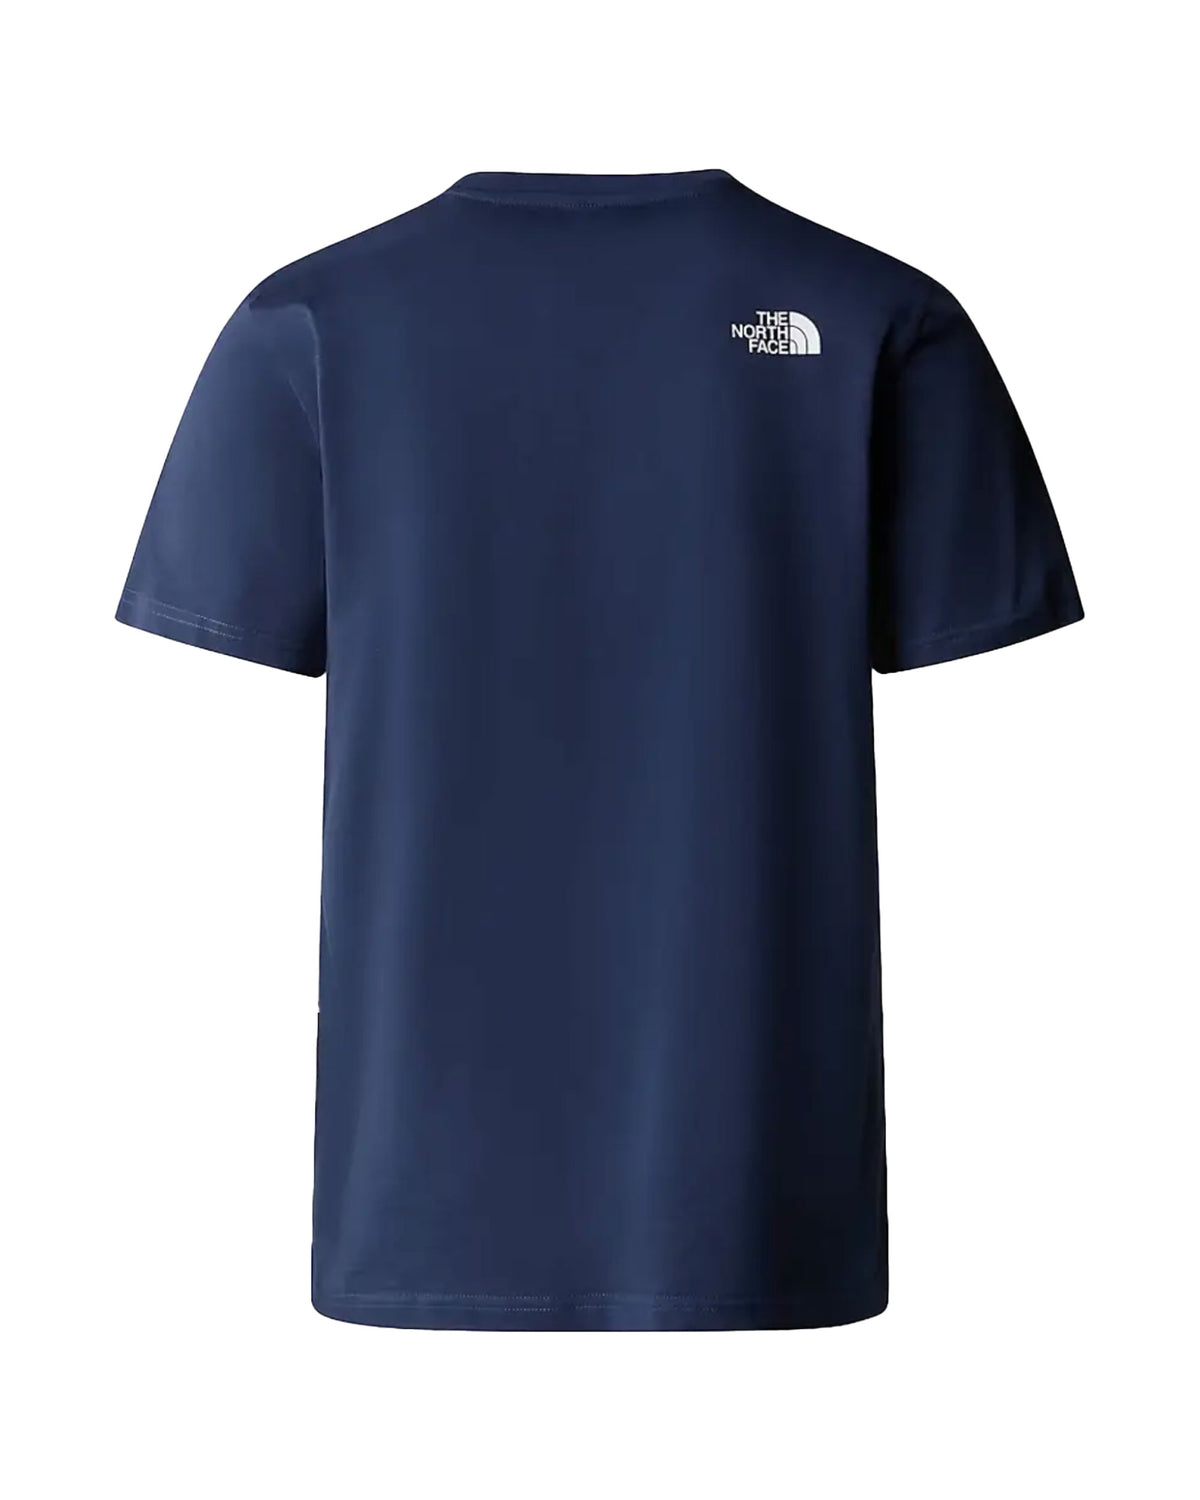 Man Tee The North Face Easy Blue